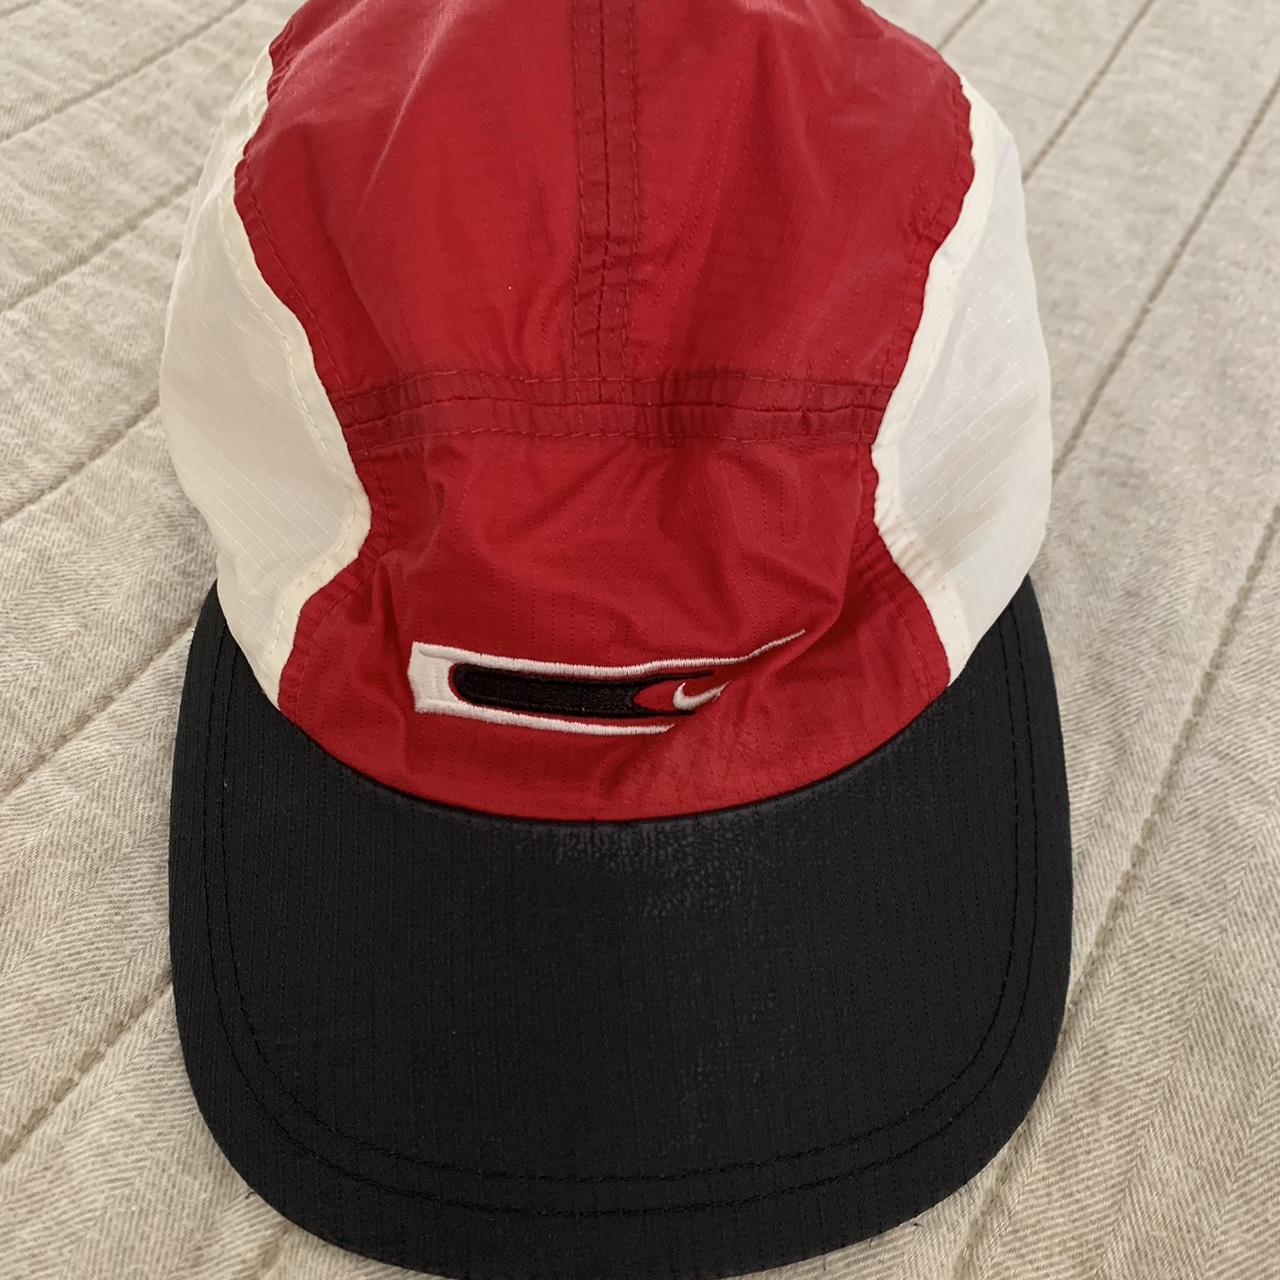 Vintage Nike hat. Runs small but tag reads “one size... - Depop